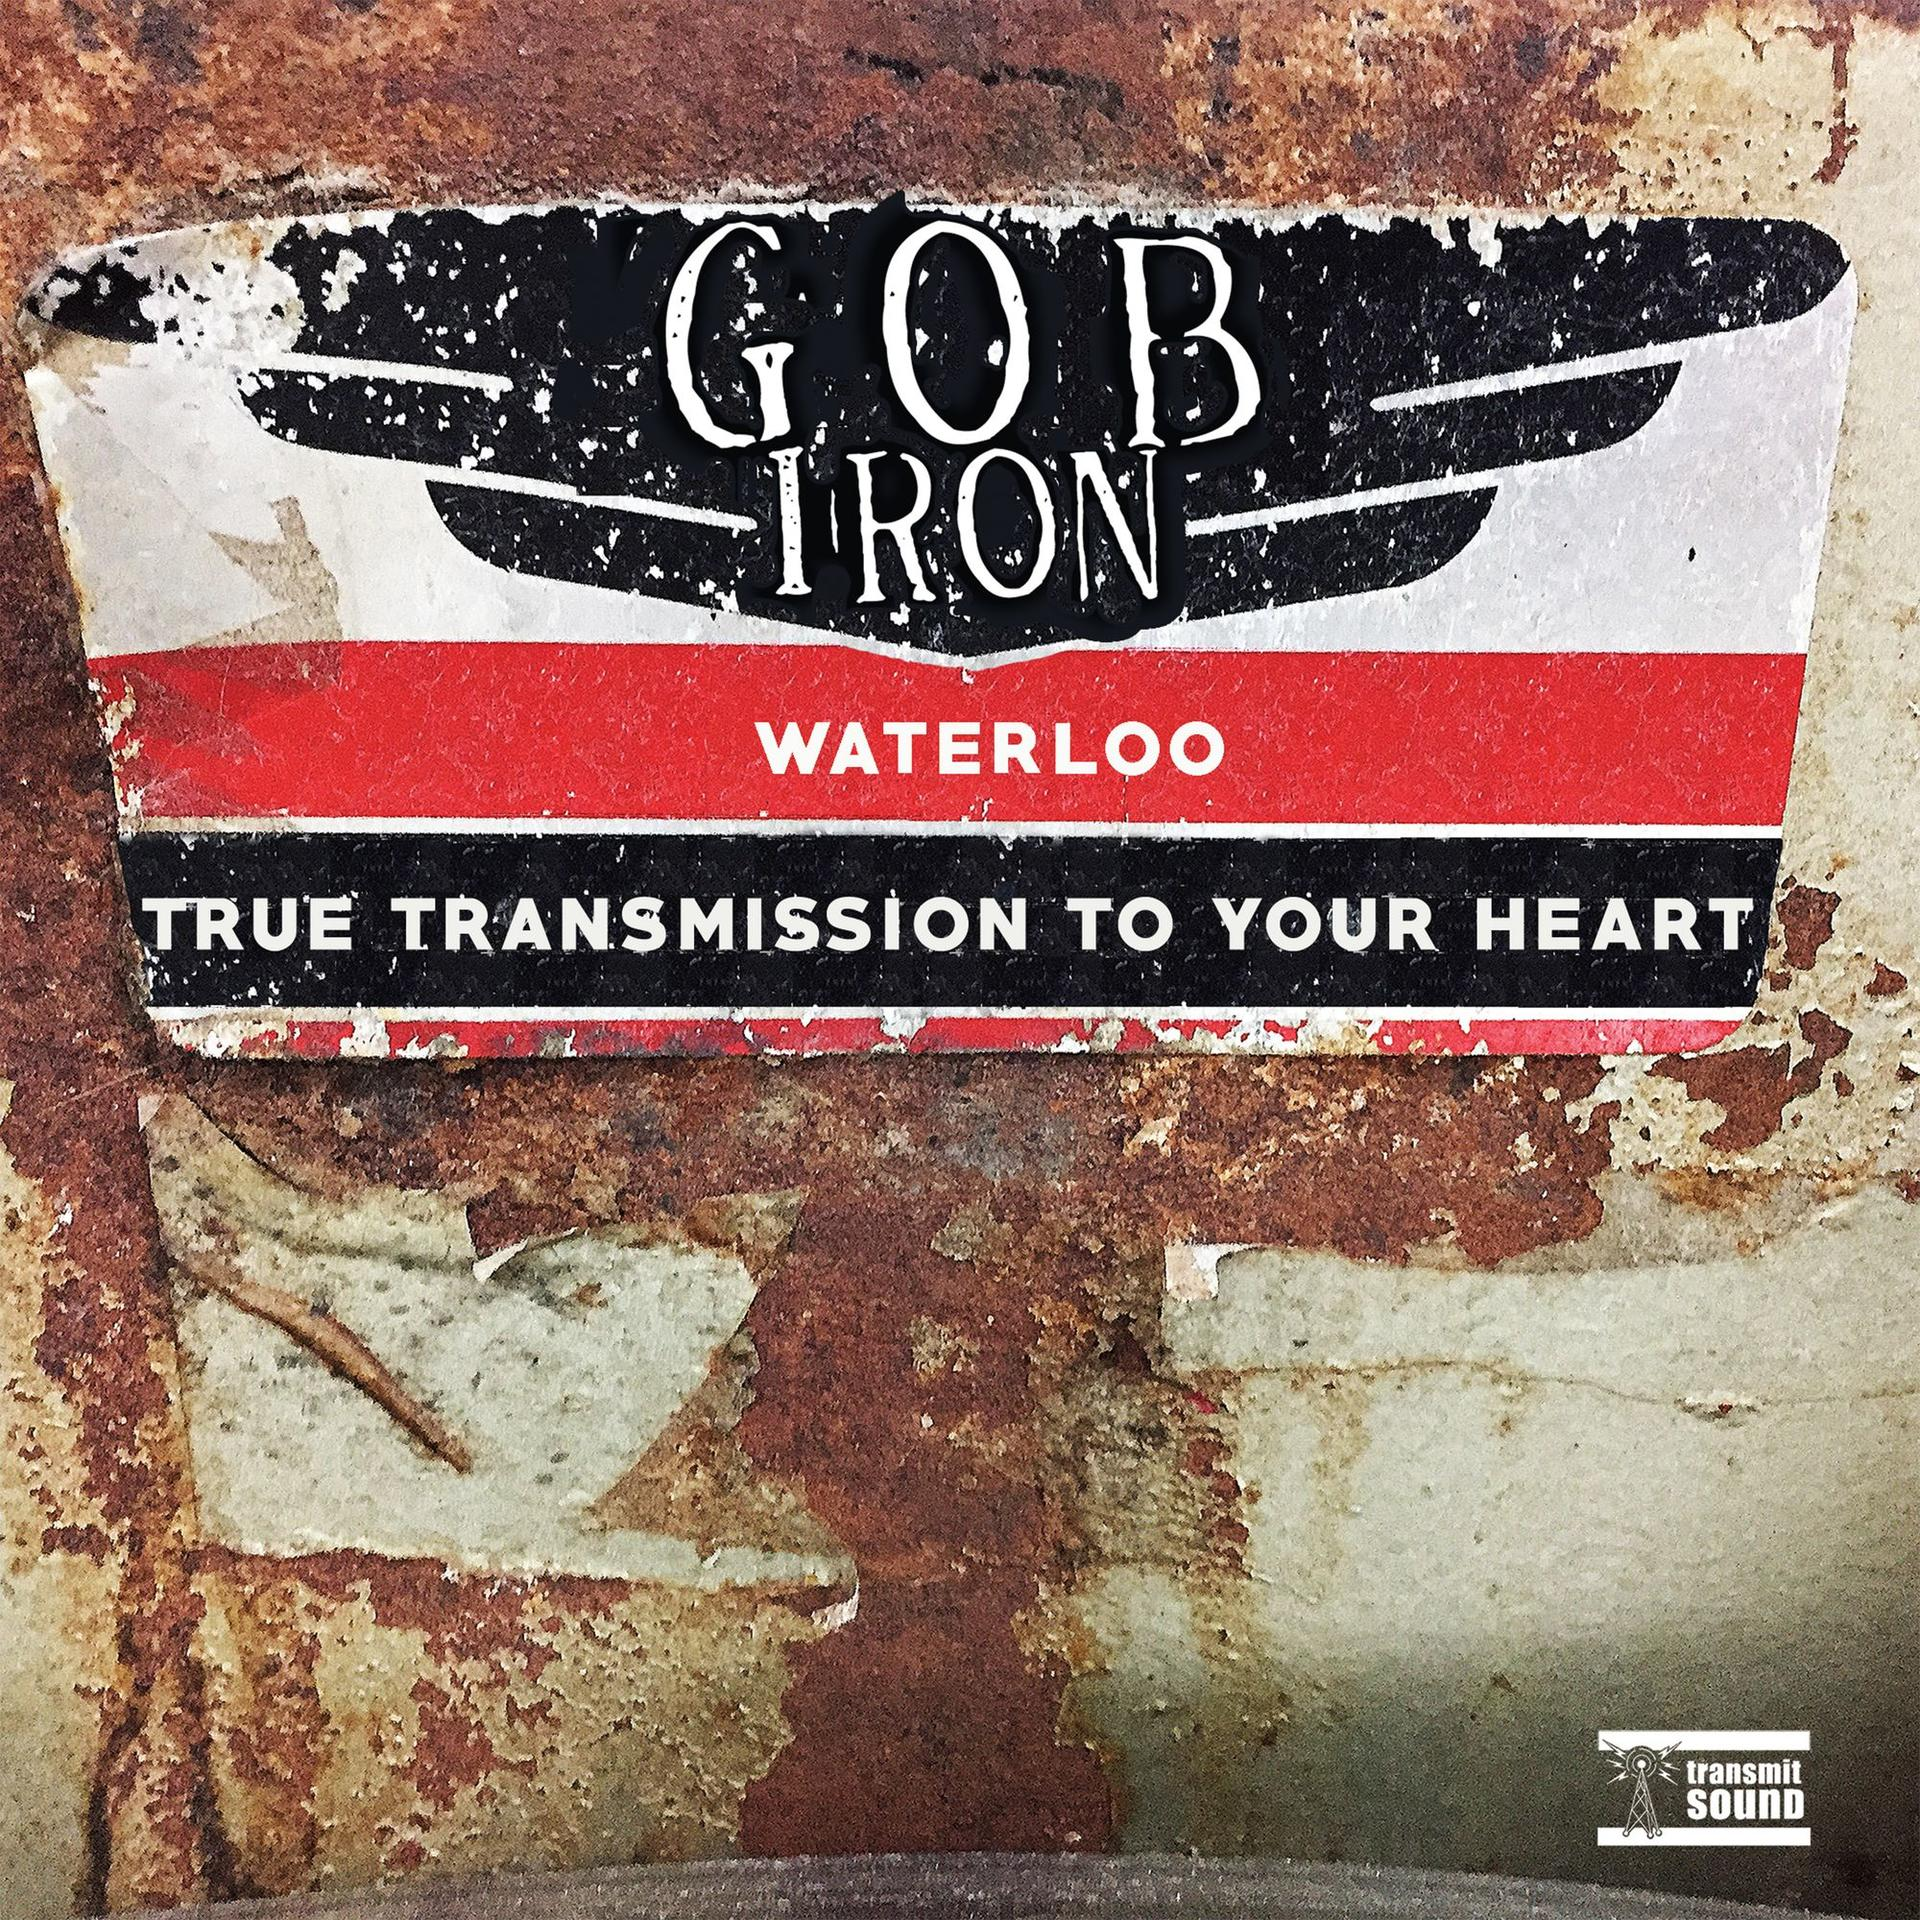 Gob Iron TO HEART - 7-WATERLOO/TRUE YOUR - TRANSMISSION (Vinyl)